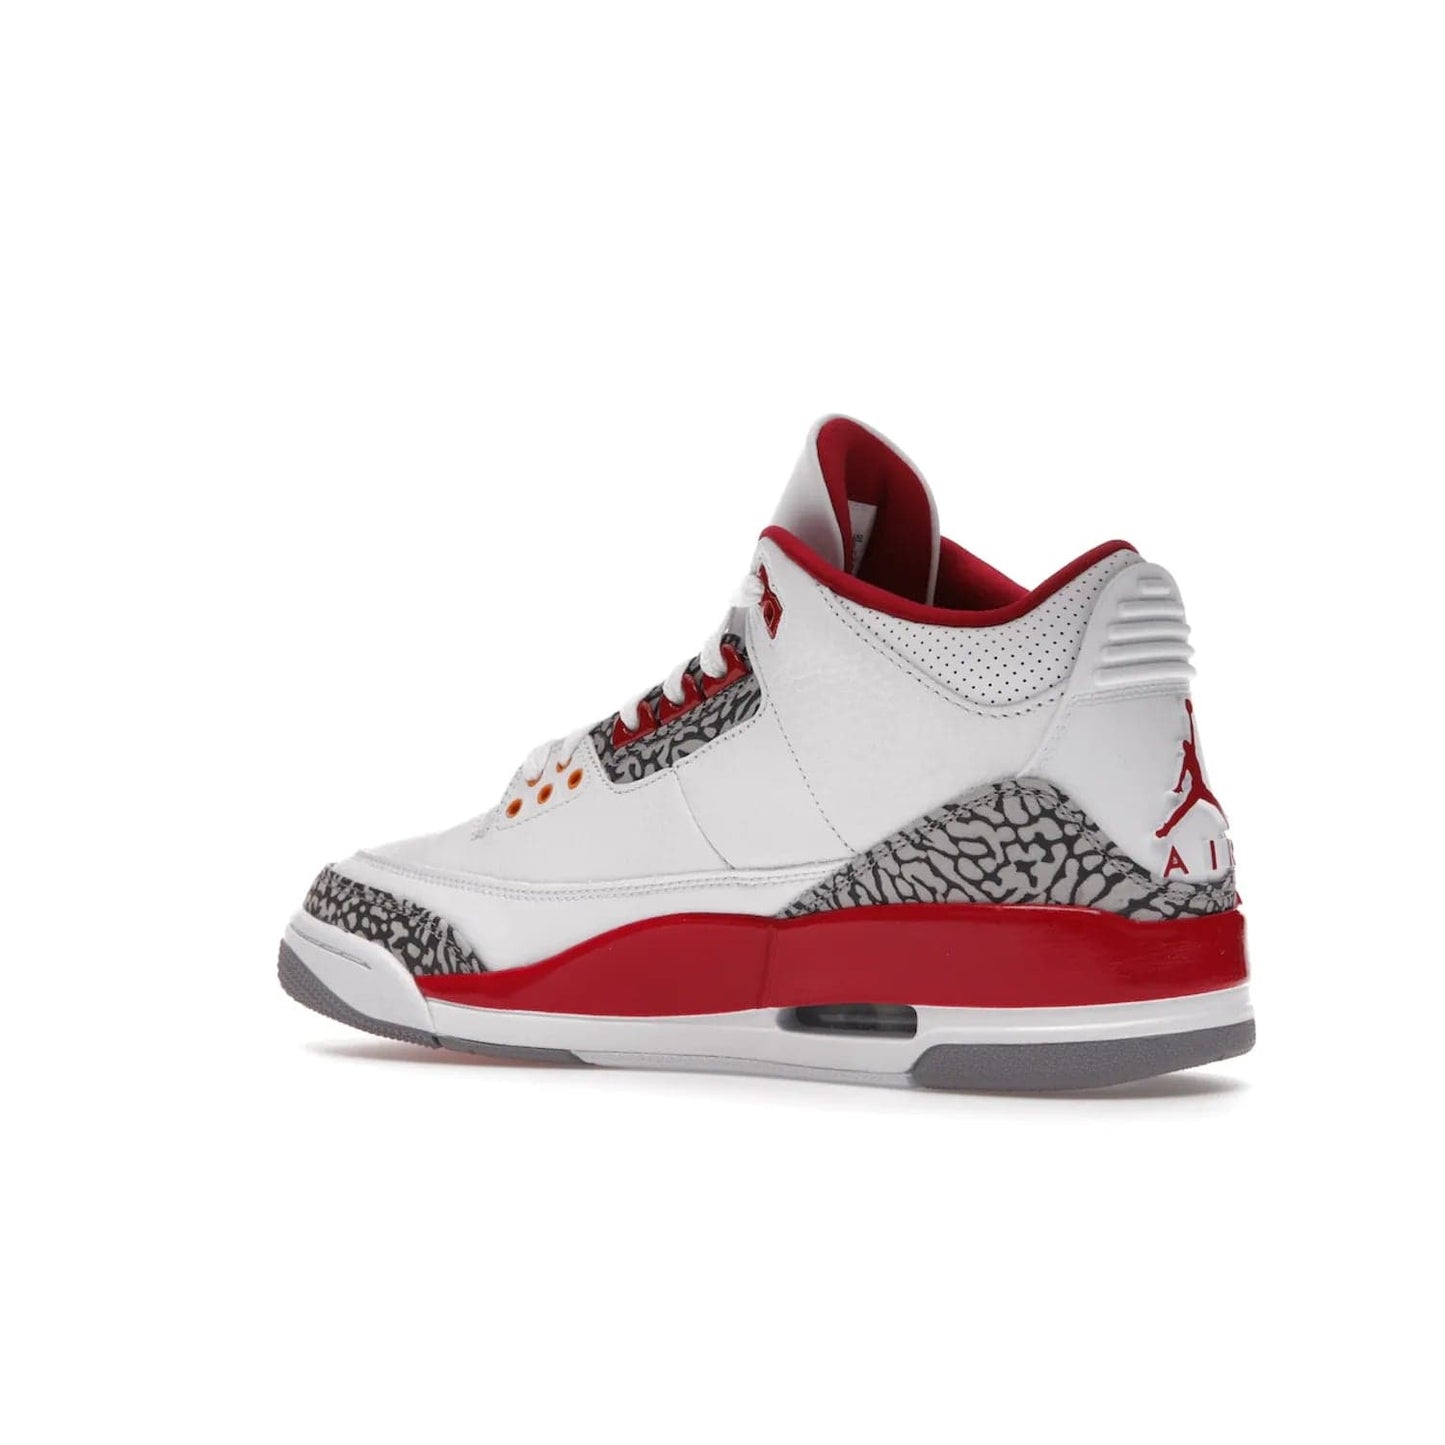 Jordan 3 Retro Cardinal Red - Image 23 - Only at www.BallersClubKickz.com - Air Jordan 3 Retro Cardinal Red combines classic style and modern appeal - white tumbled leather, signature Elephant Print overlays, cardinal red midsoles, Jumpman logo embroidery. Available Feb 2022.